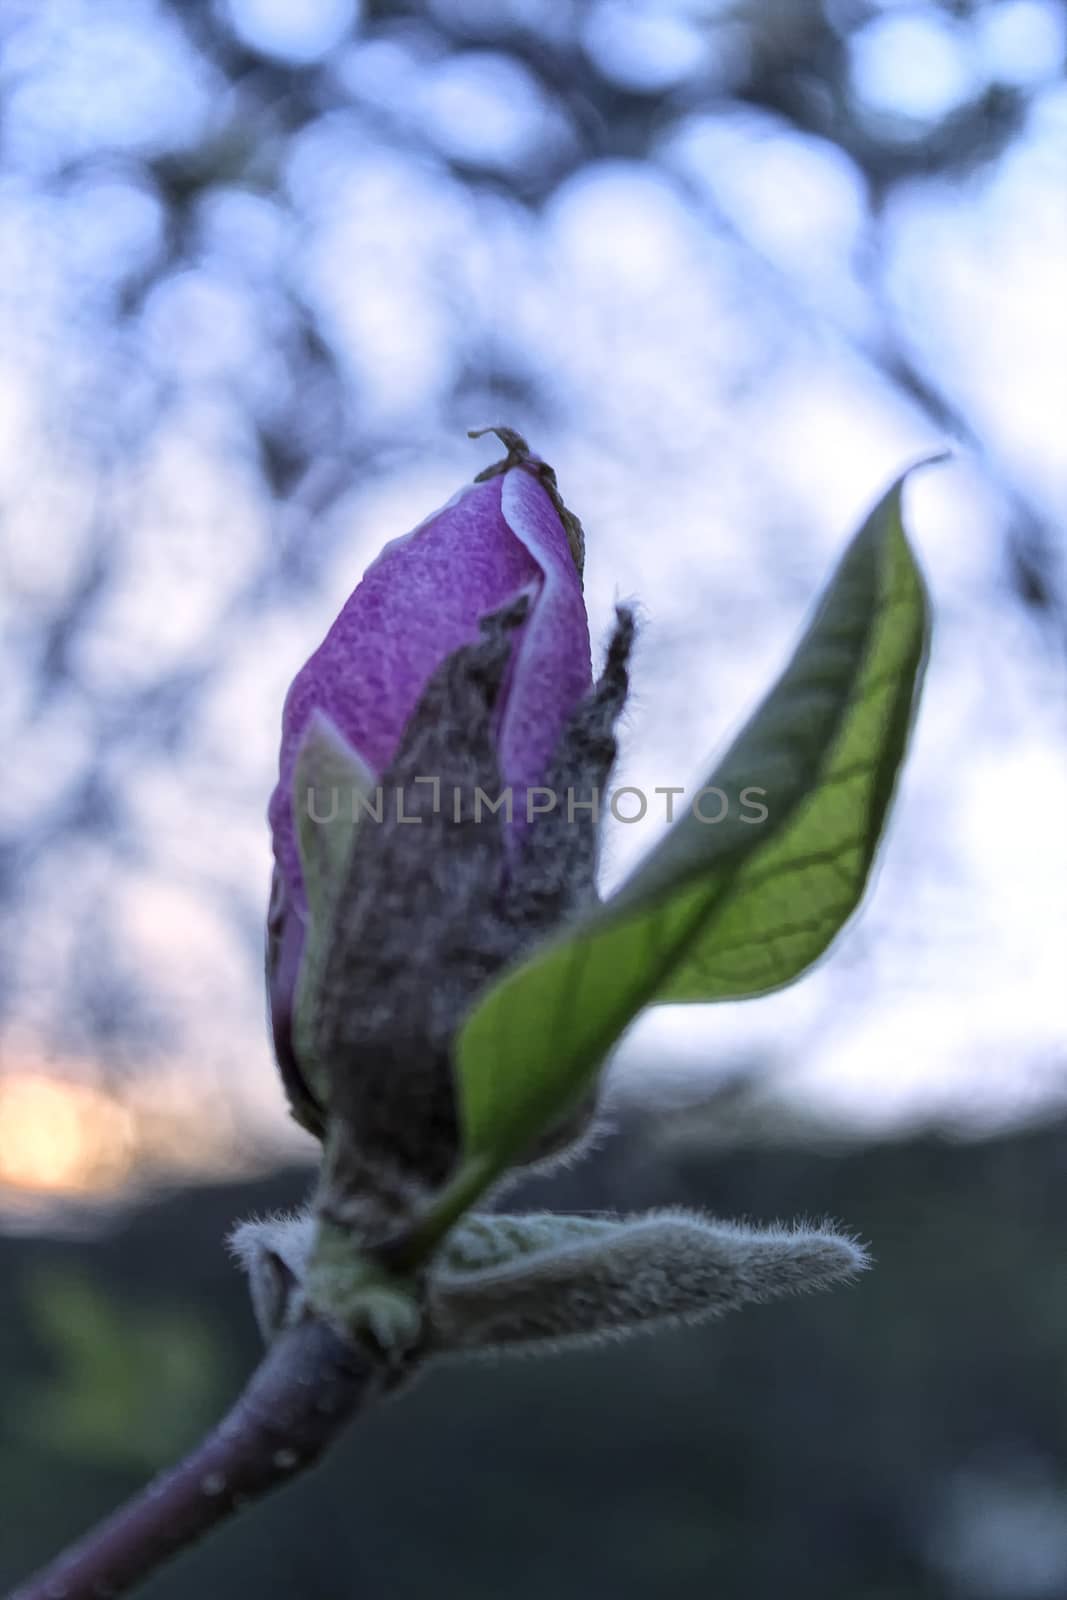 Purple magnolia bud with a green leaf on a tree bench, shallow DOF.